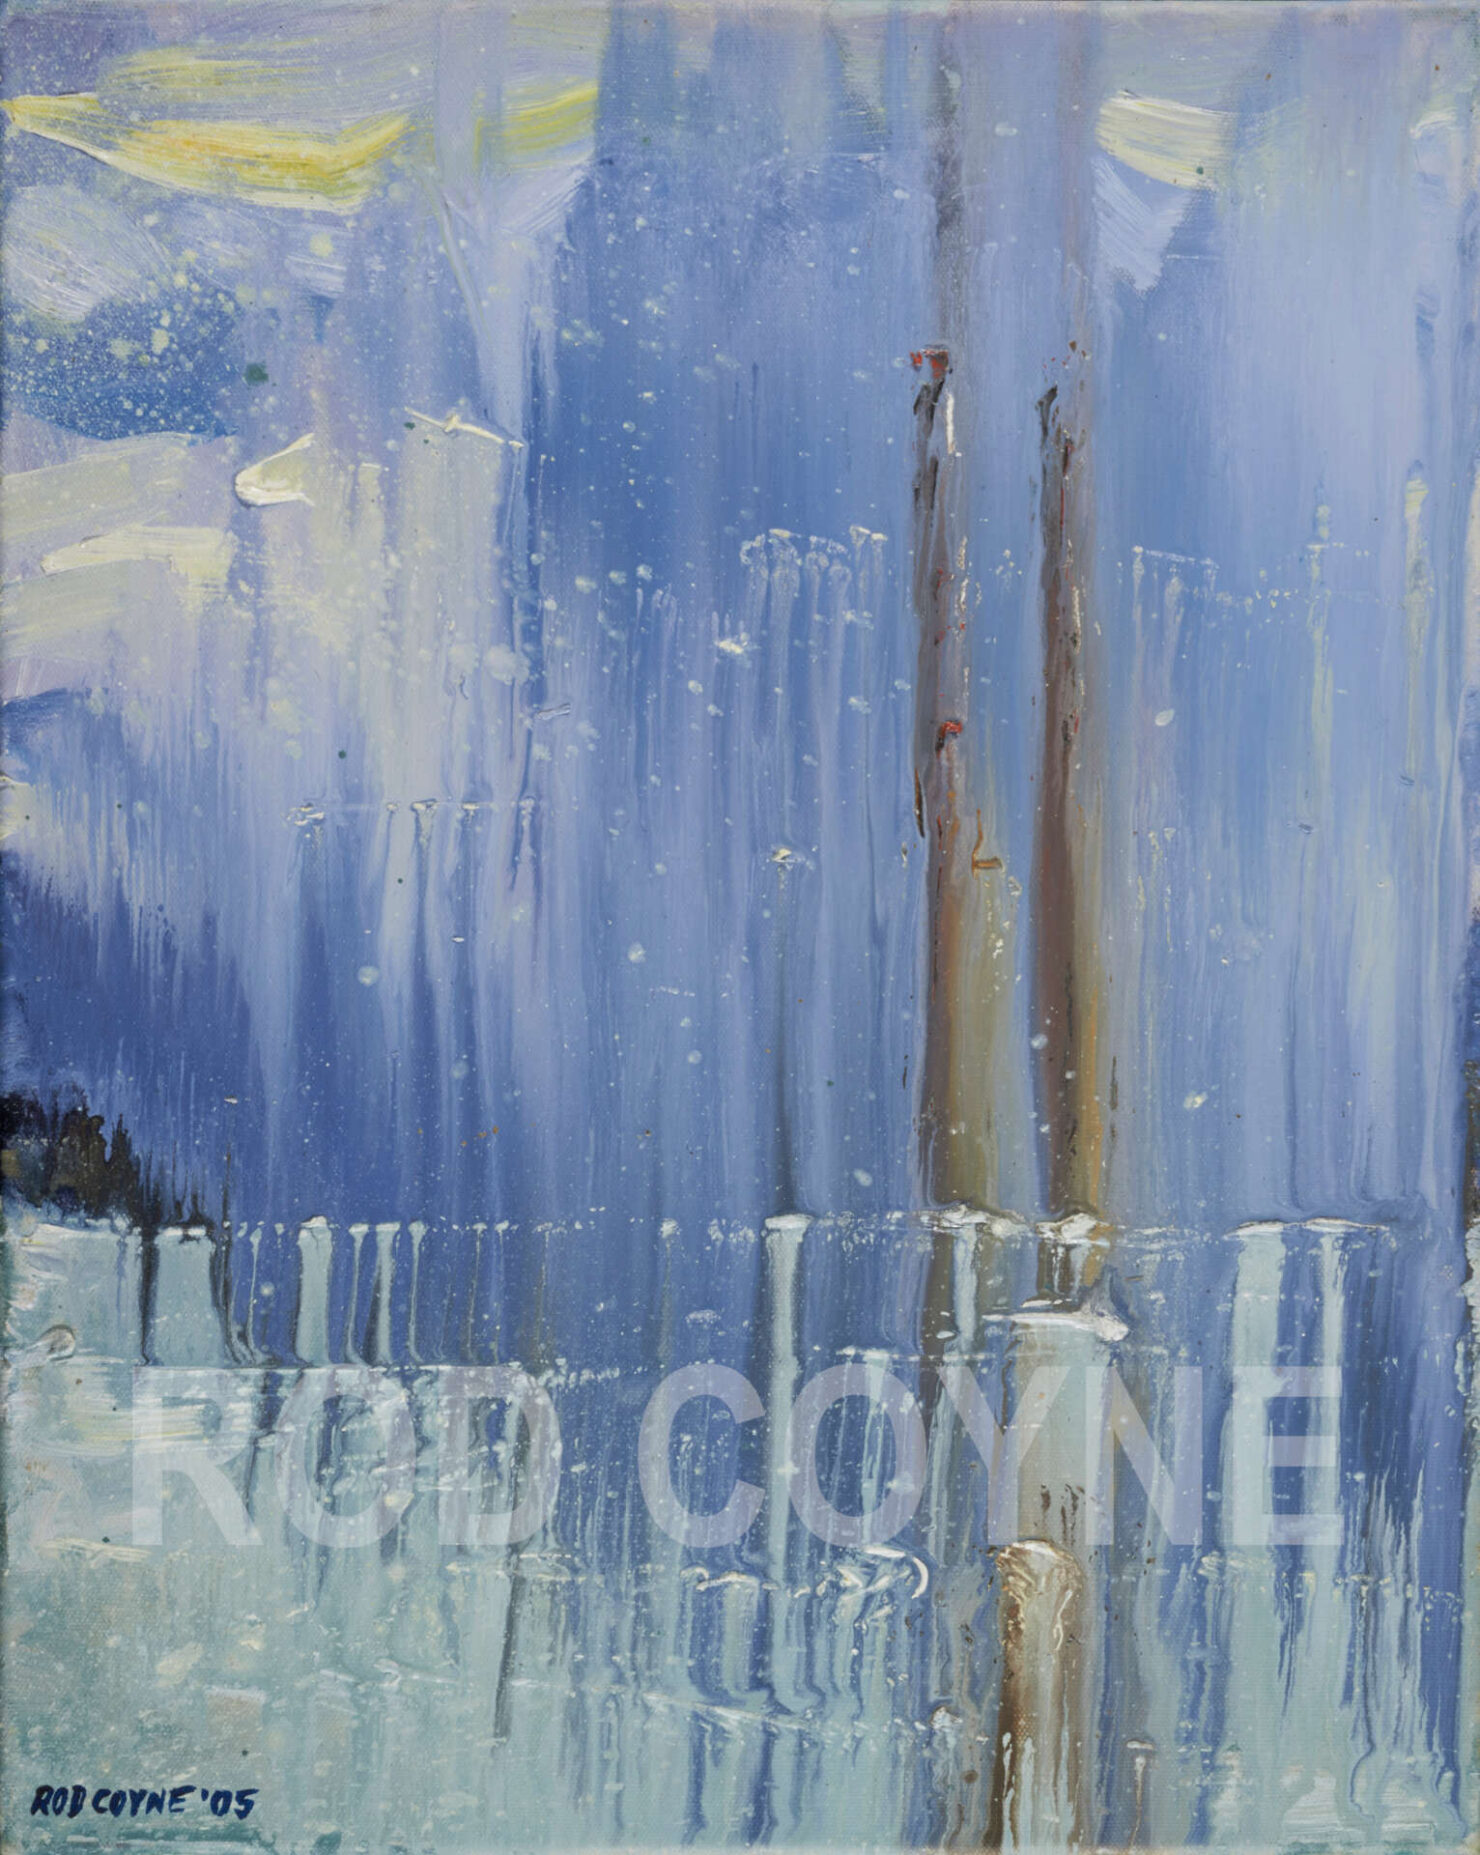 artist rod coyne's seascape "pigeon house on ice" is shown here, watermarked..